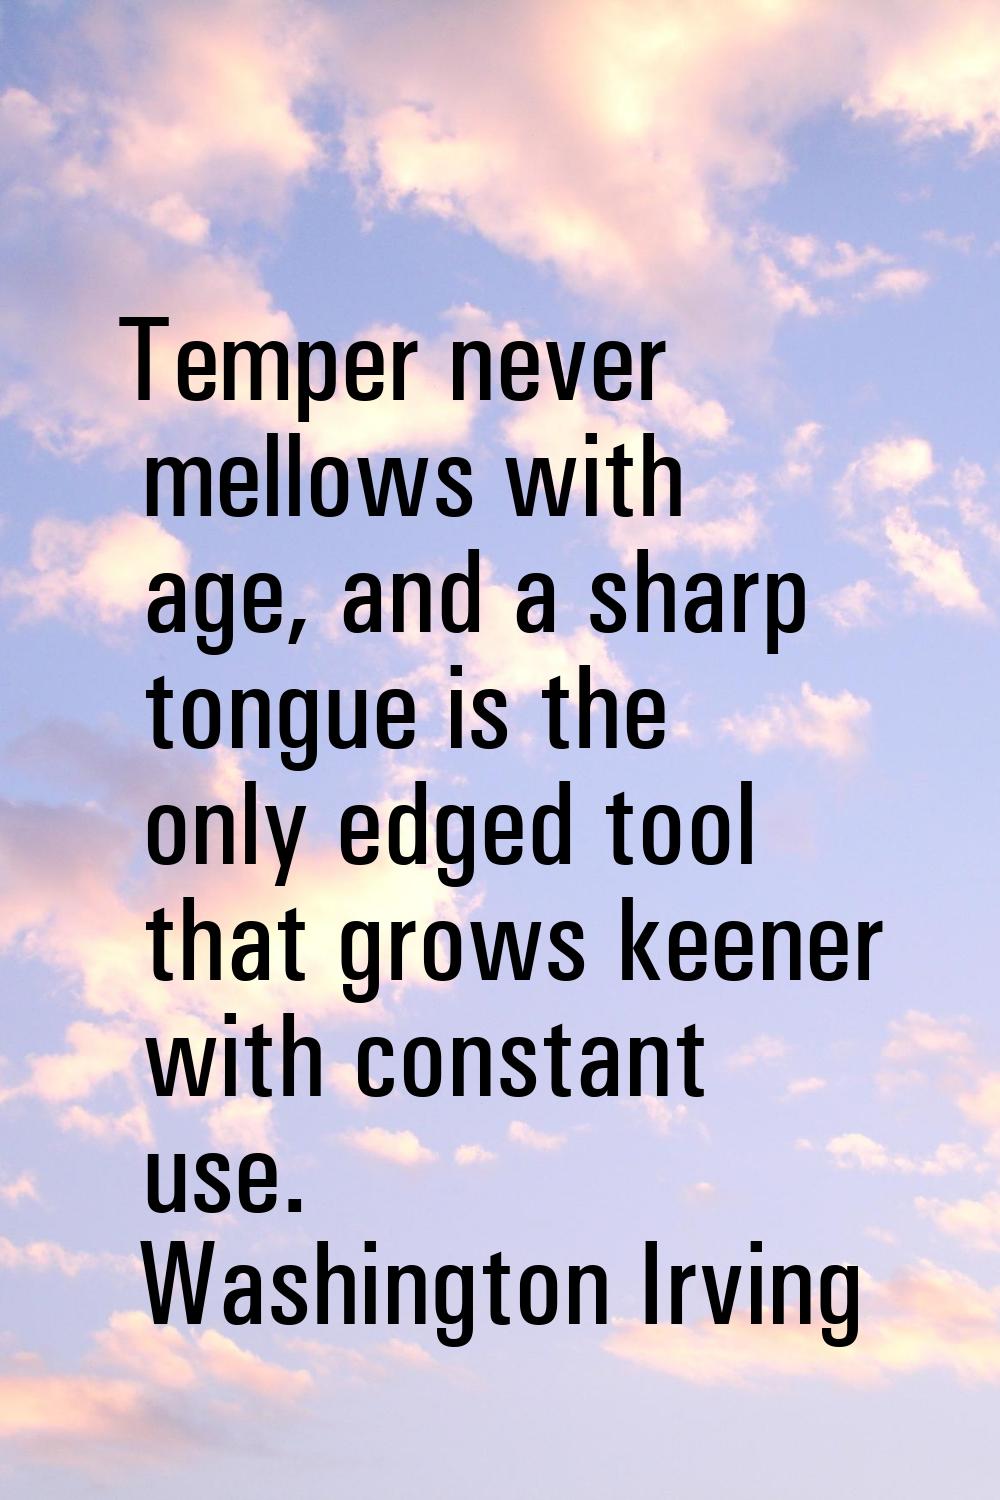 Temper never mellows with age, and a sharp tongue is the only edged tool that grows keener with con